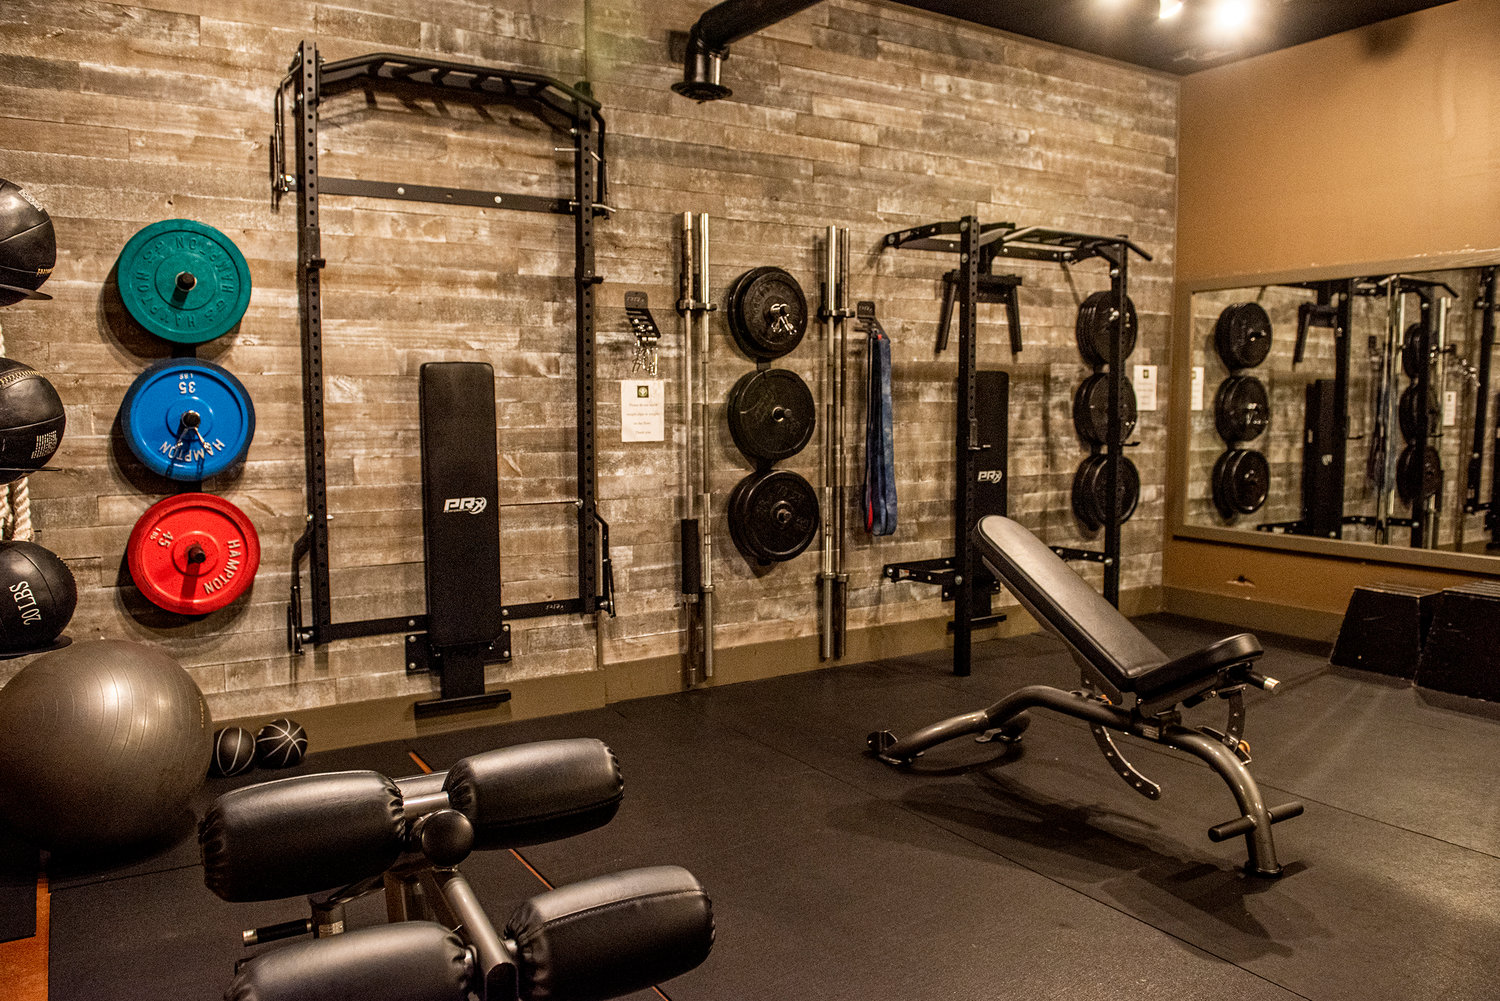 The weight room at Elevo Dynamics on Person Street.